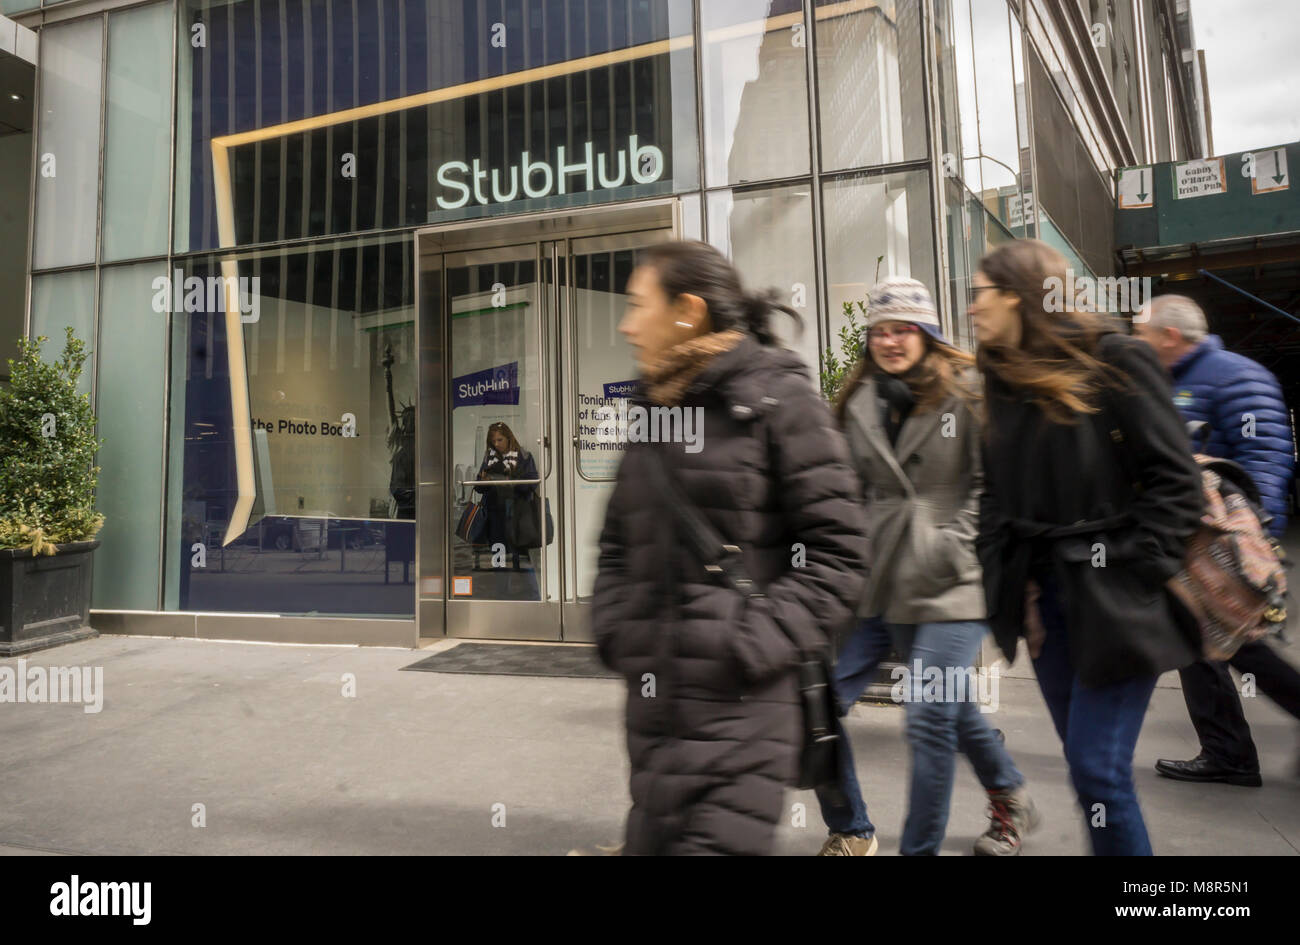 A StubHub ticket broker storefront in Midtown in New York on Saturday, March 10, 2018. StubHub is owned by eBay. (© Richard B. Levine) Stock Photo